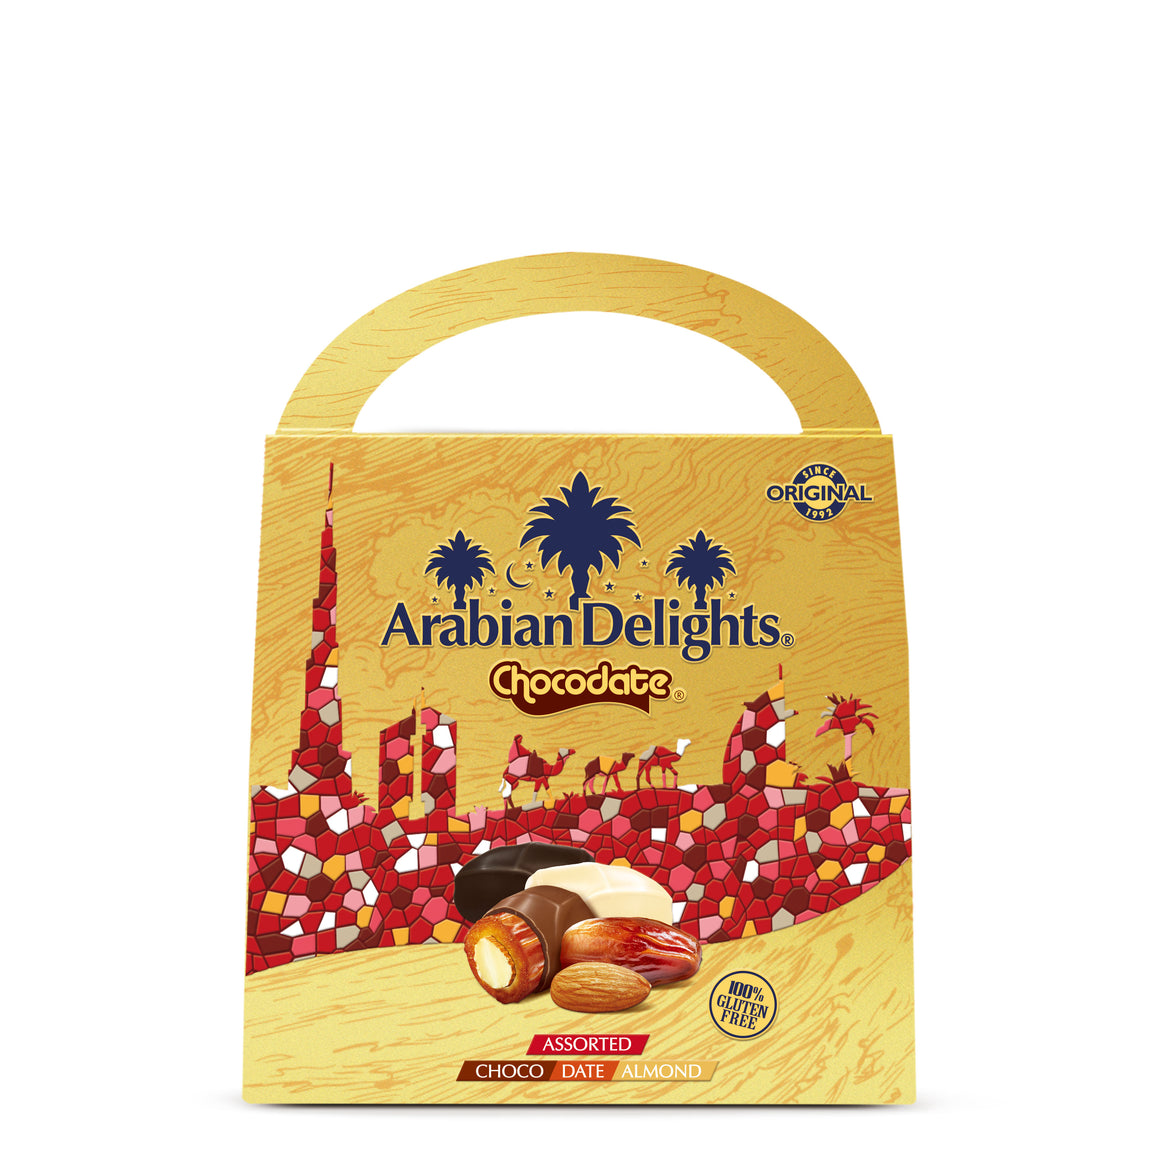 Arabian Delights Assorted Chocodate, Classic Chocolate Coated Bite-Sized Snacks, Stuffed w/ Golden Roasted Almonds ,Dates| Snacks & Sweets 500g Pouch